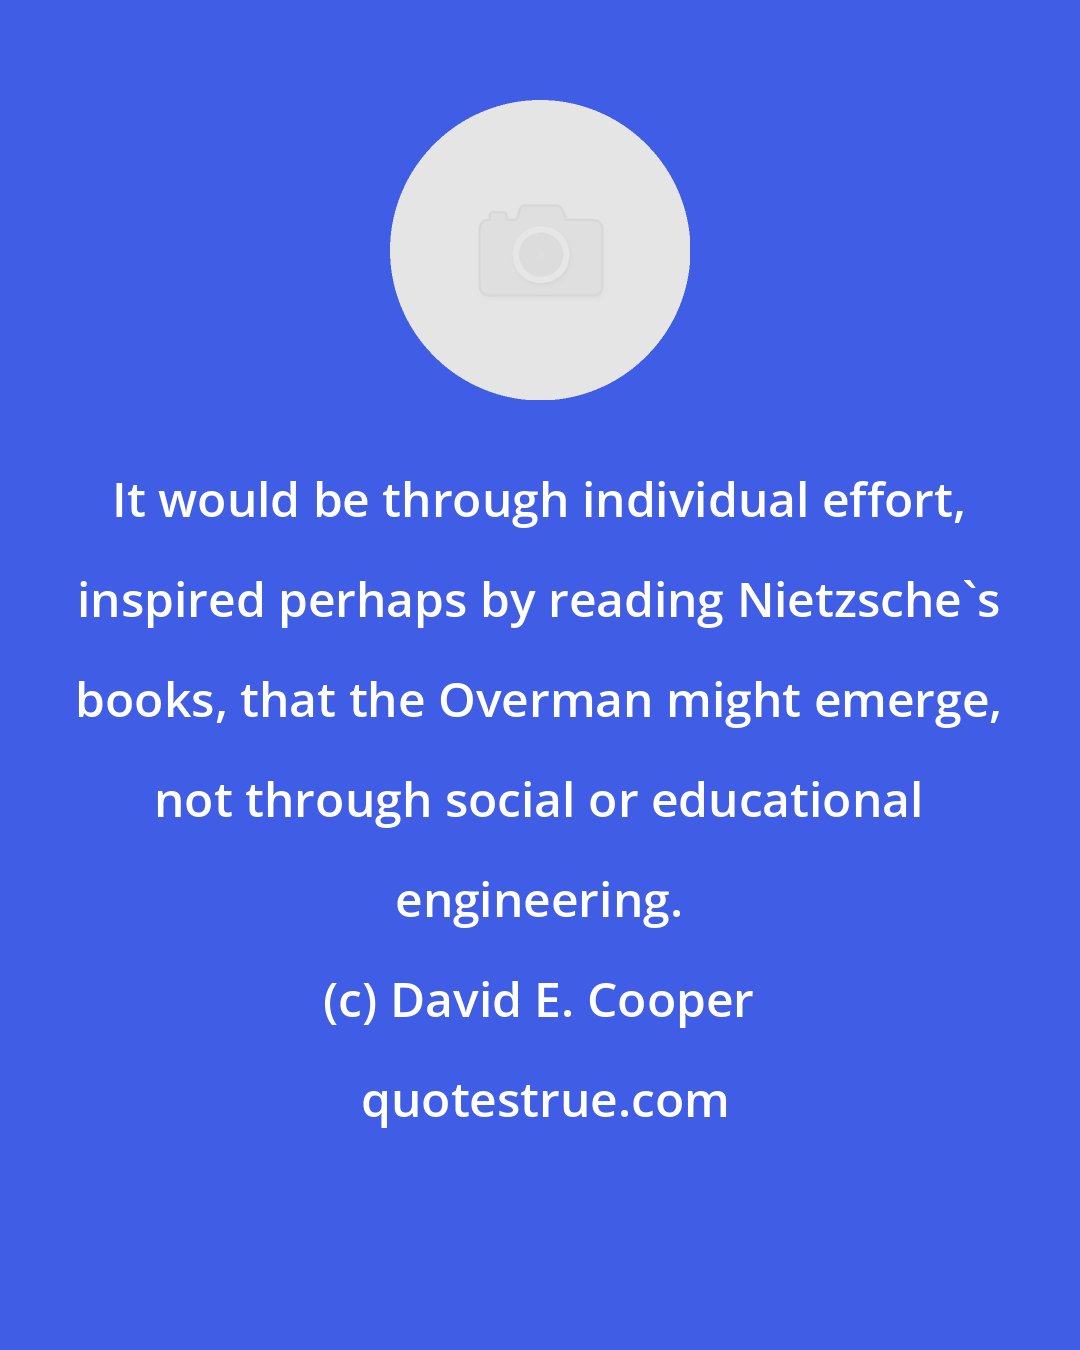 David E. Cooper: It would be through individual effort, inspired perhaps by reading Nietzsche's books, that the Overman might emerge, not through social or educational engineering.